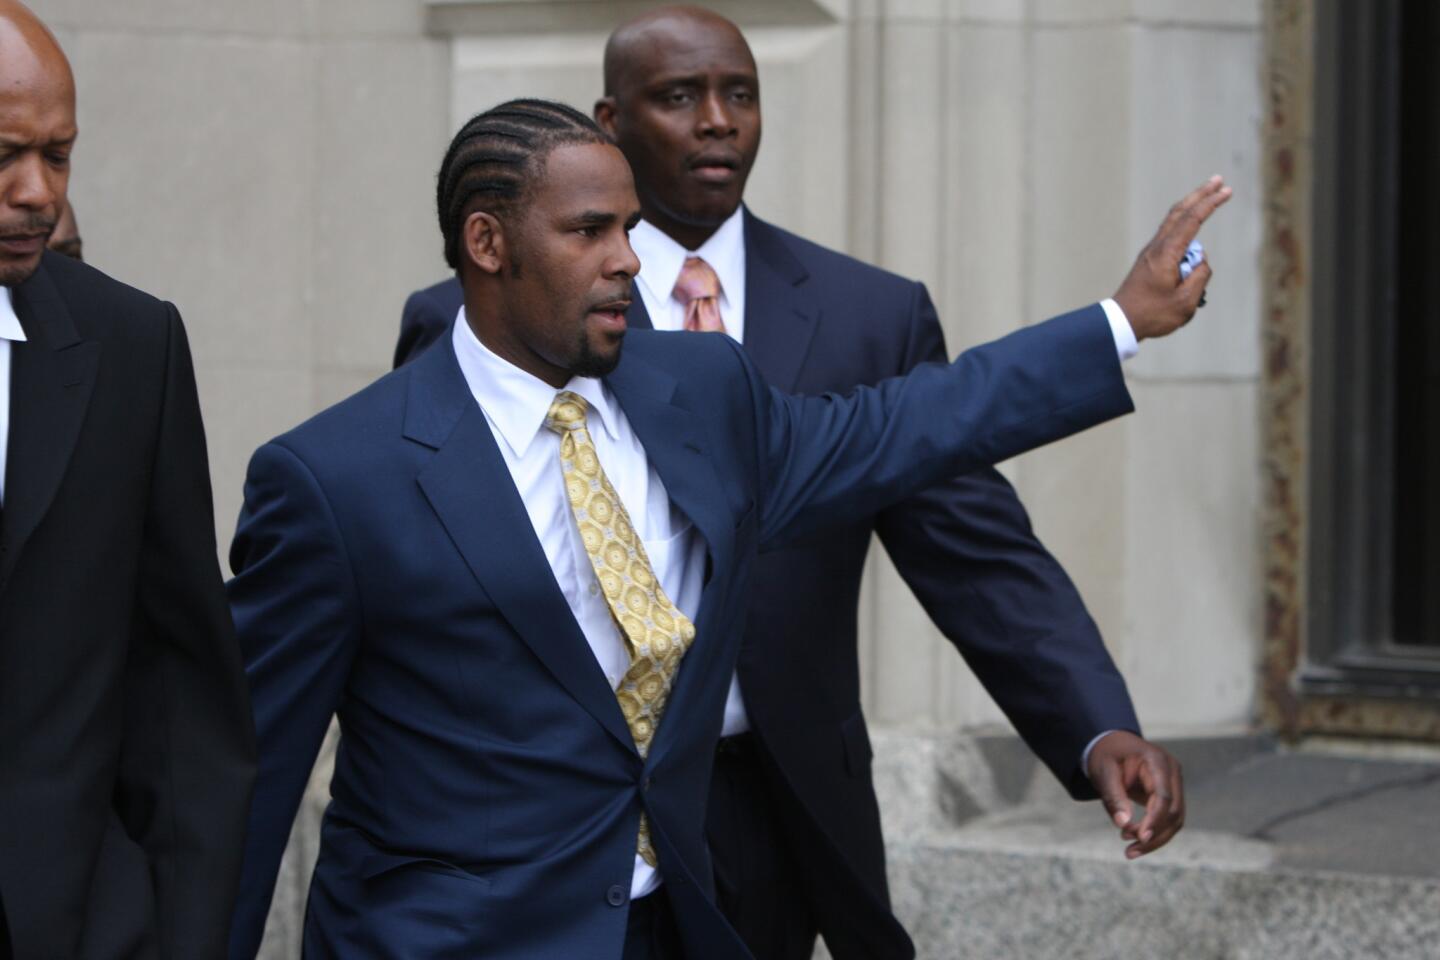 R. Kelly acquitted